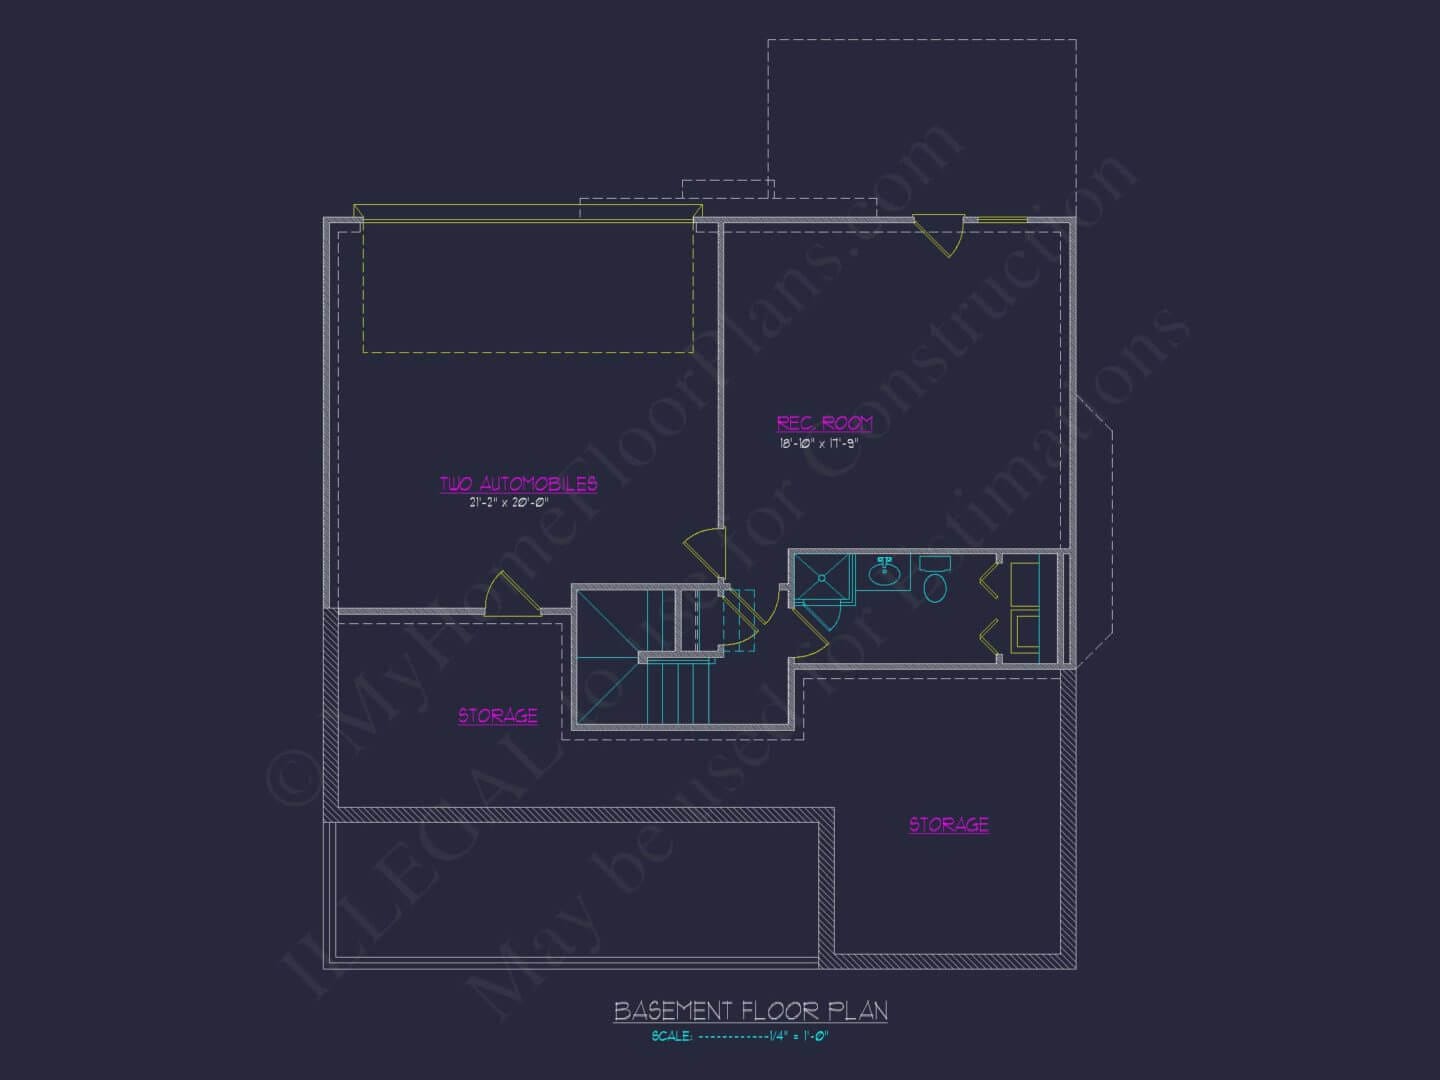 8-1266 my home floor plans_Page_08